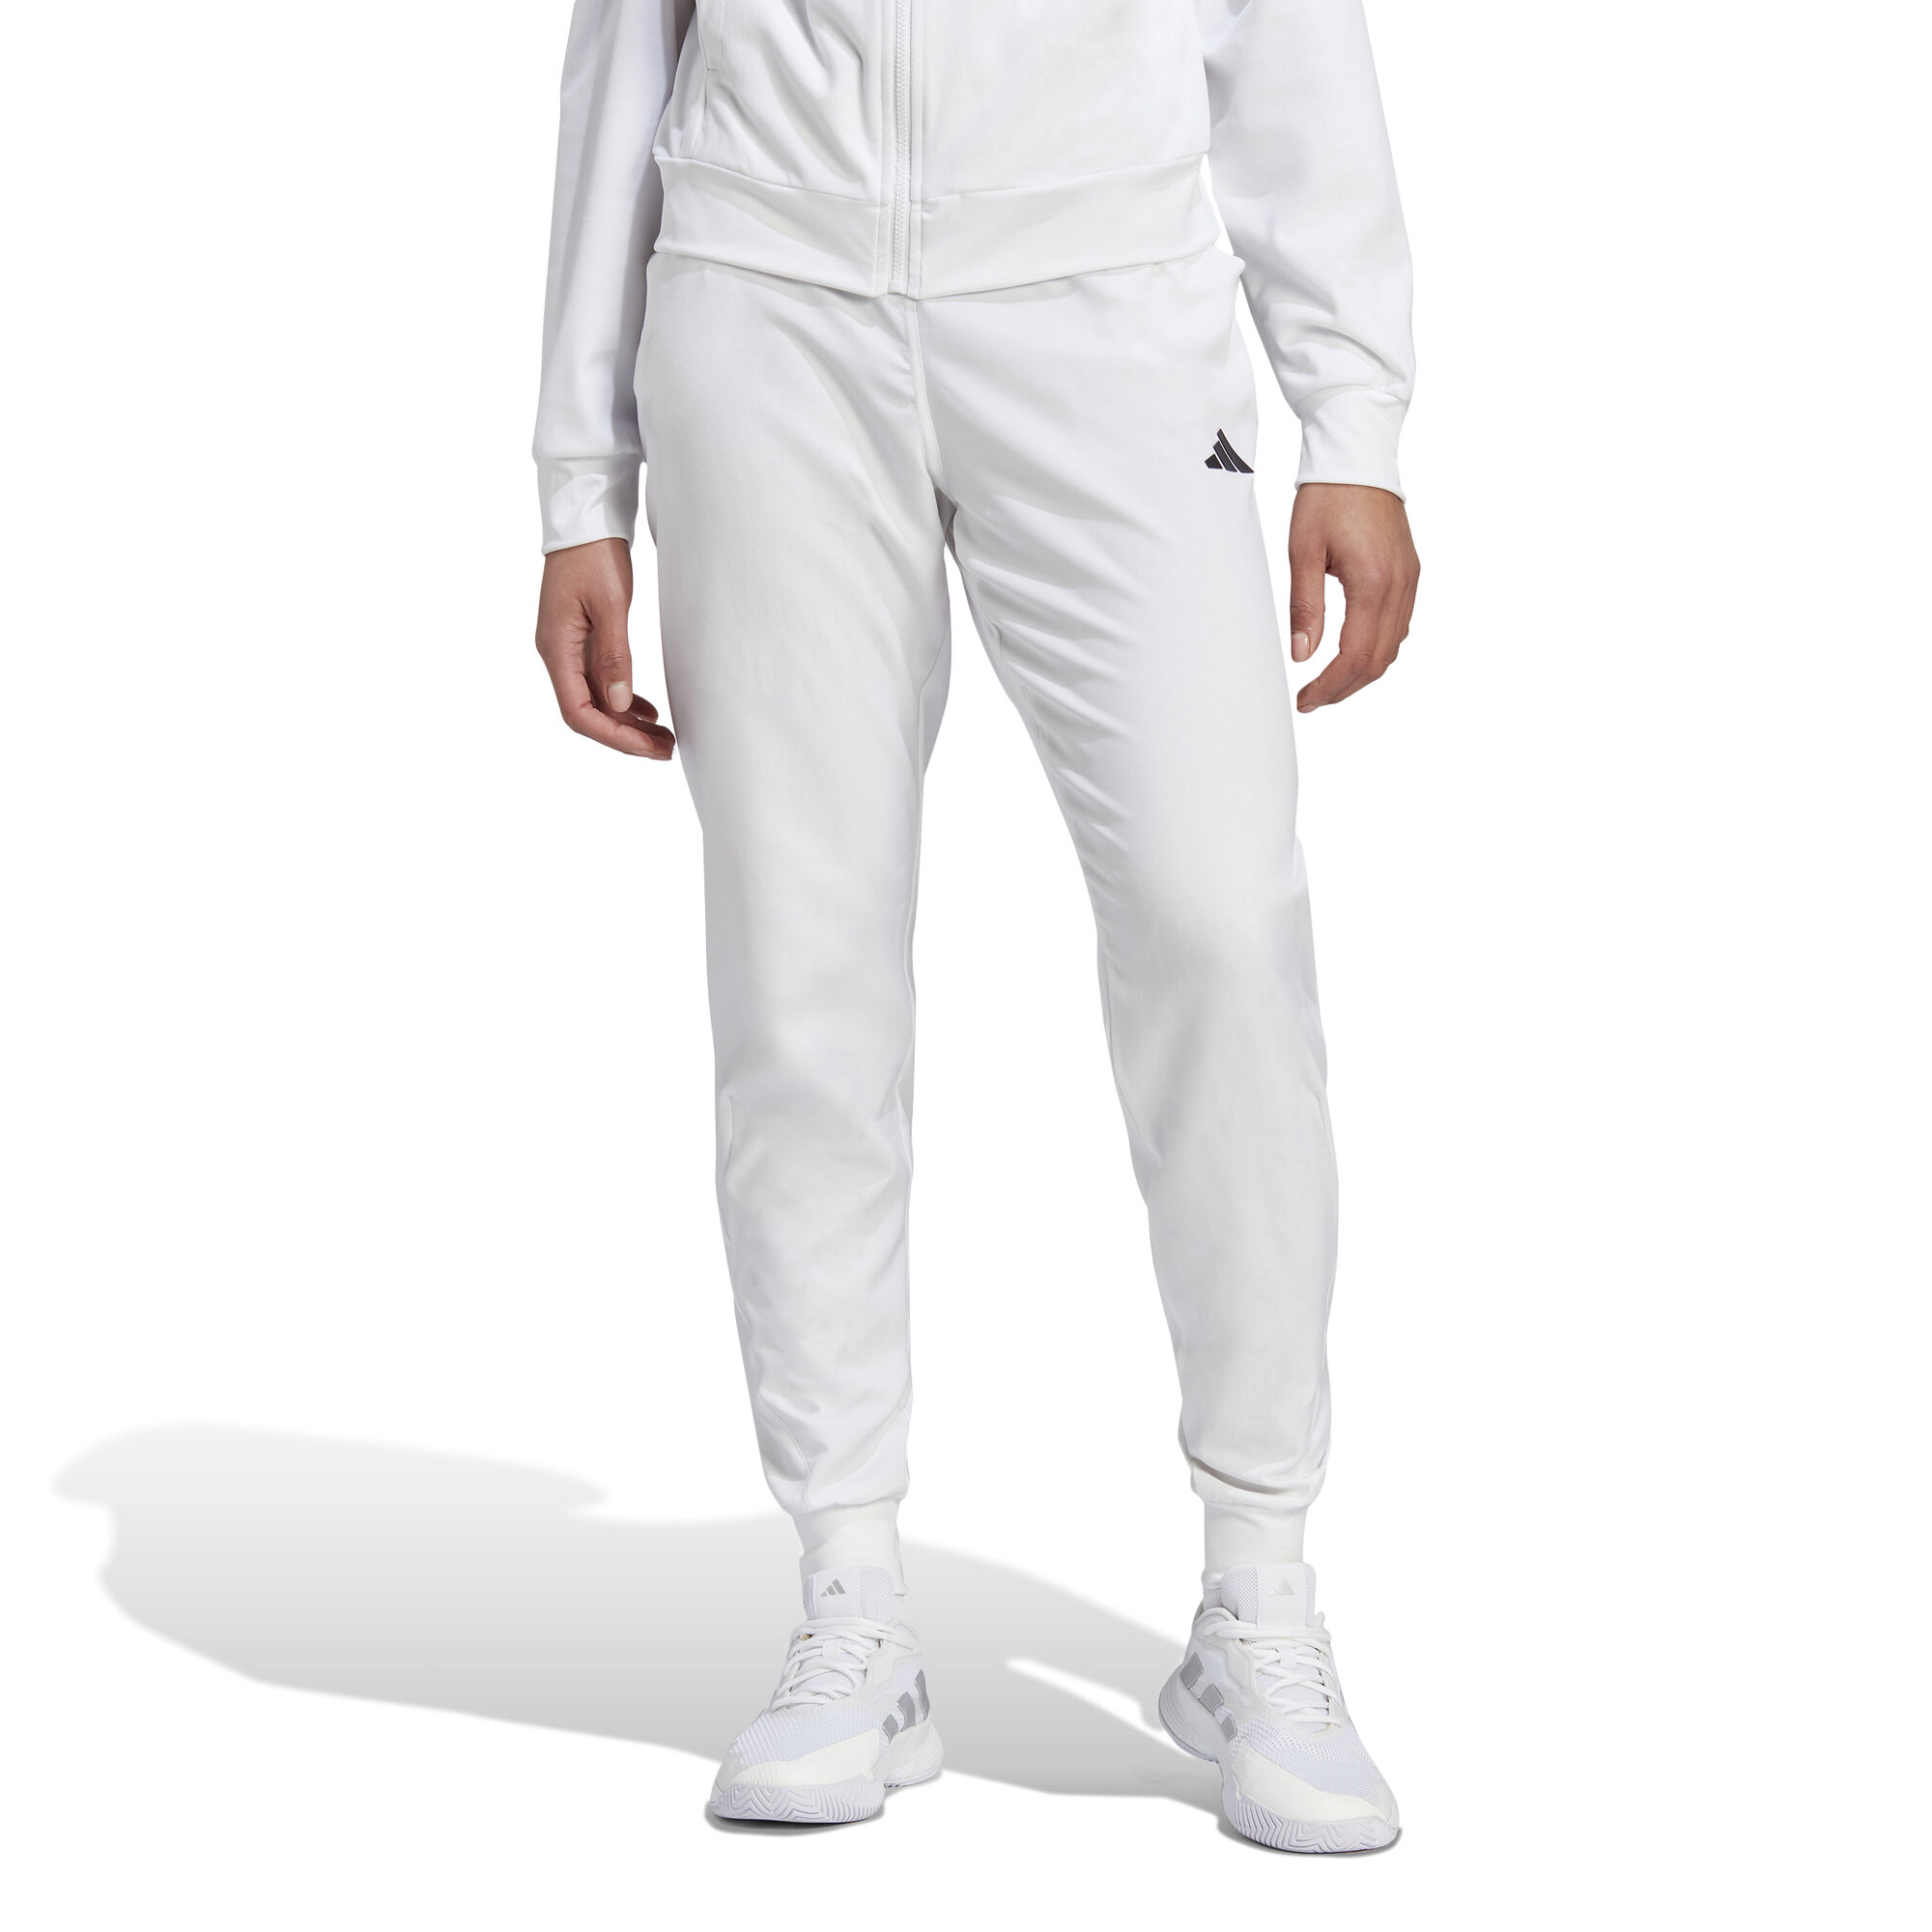 buy Woven Pro Training Pants - White online | Tennis-Point